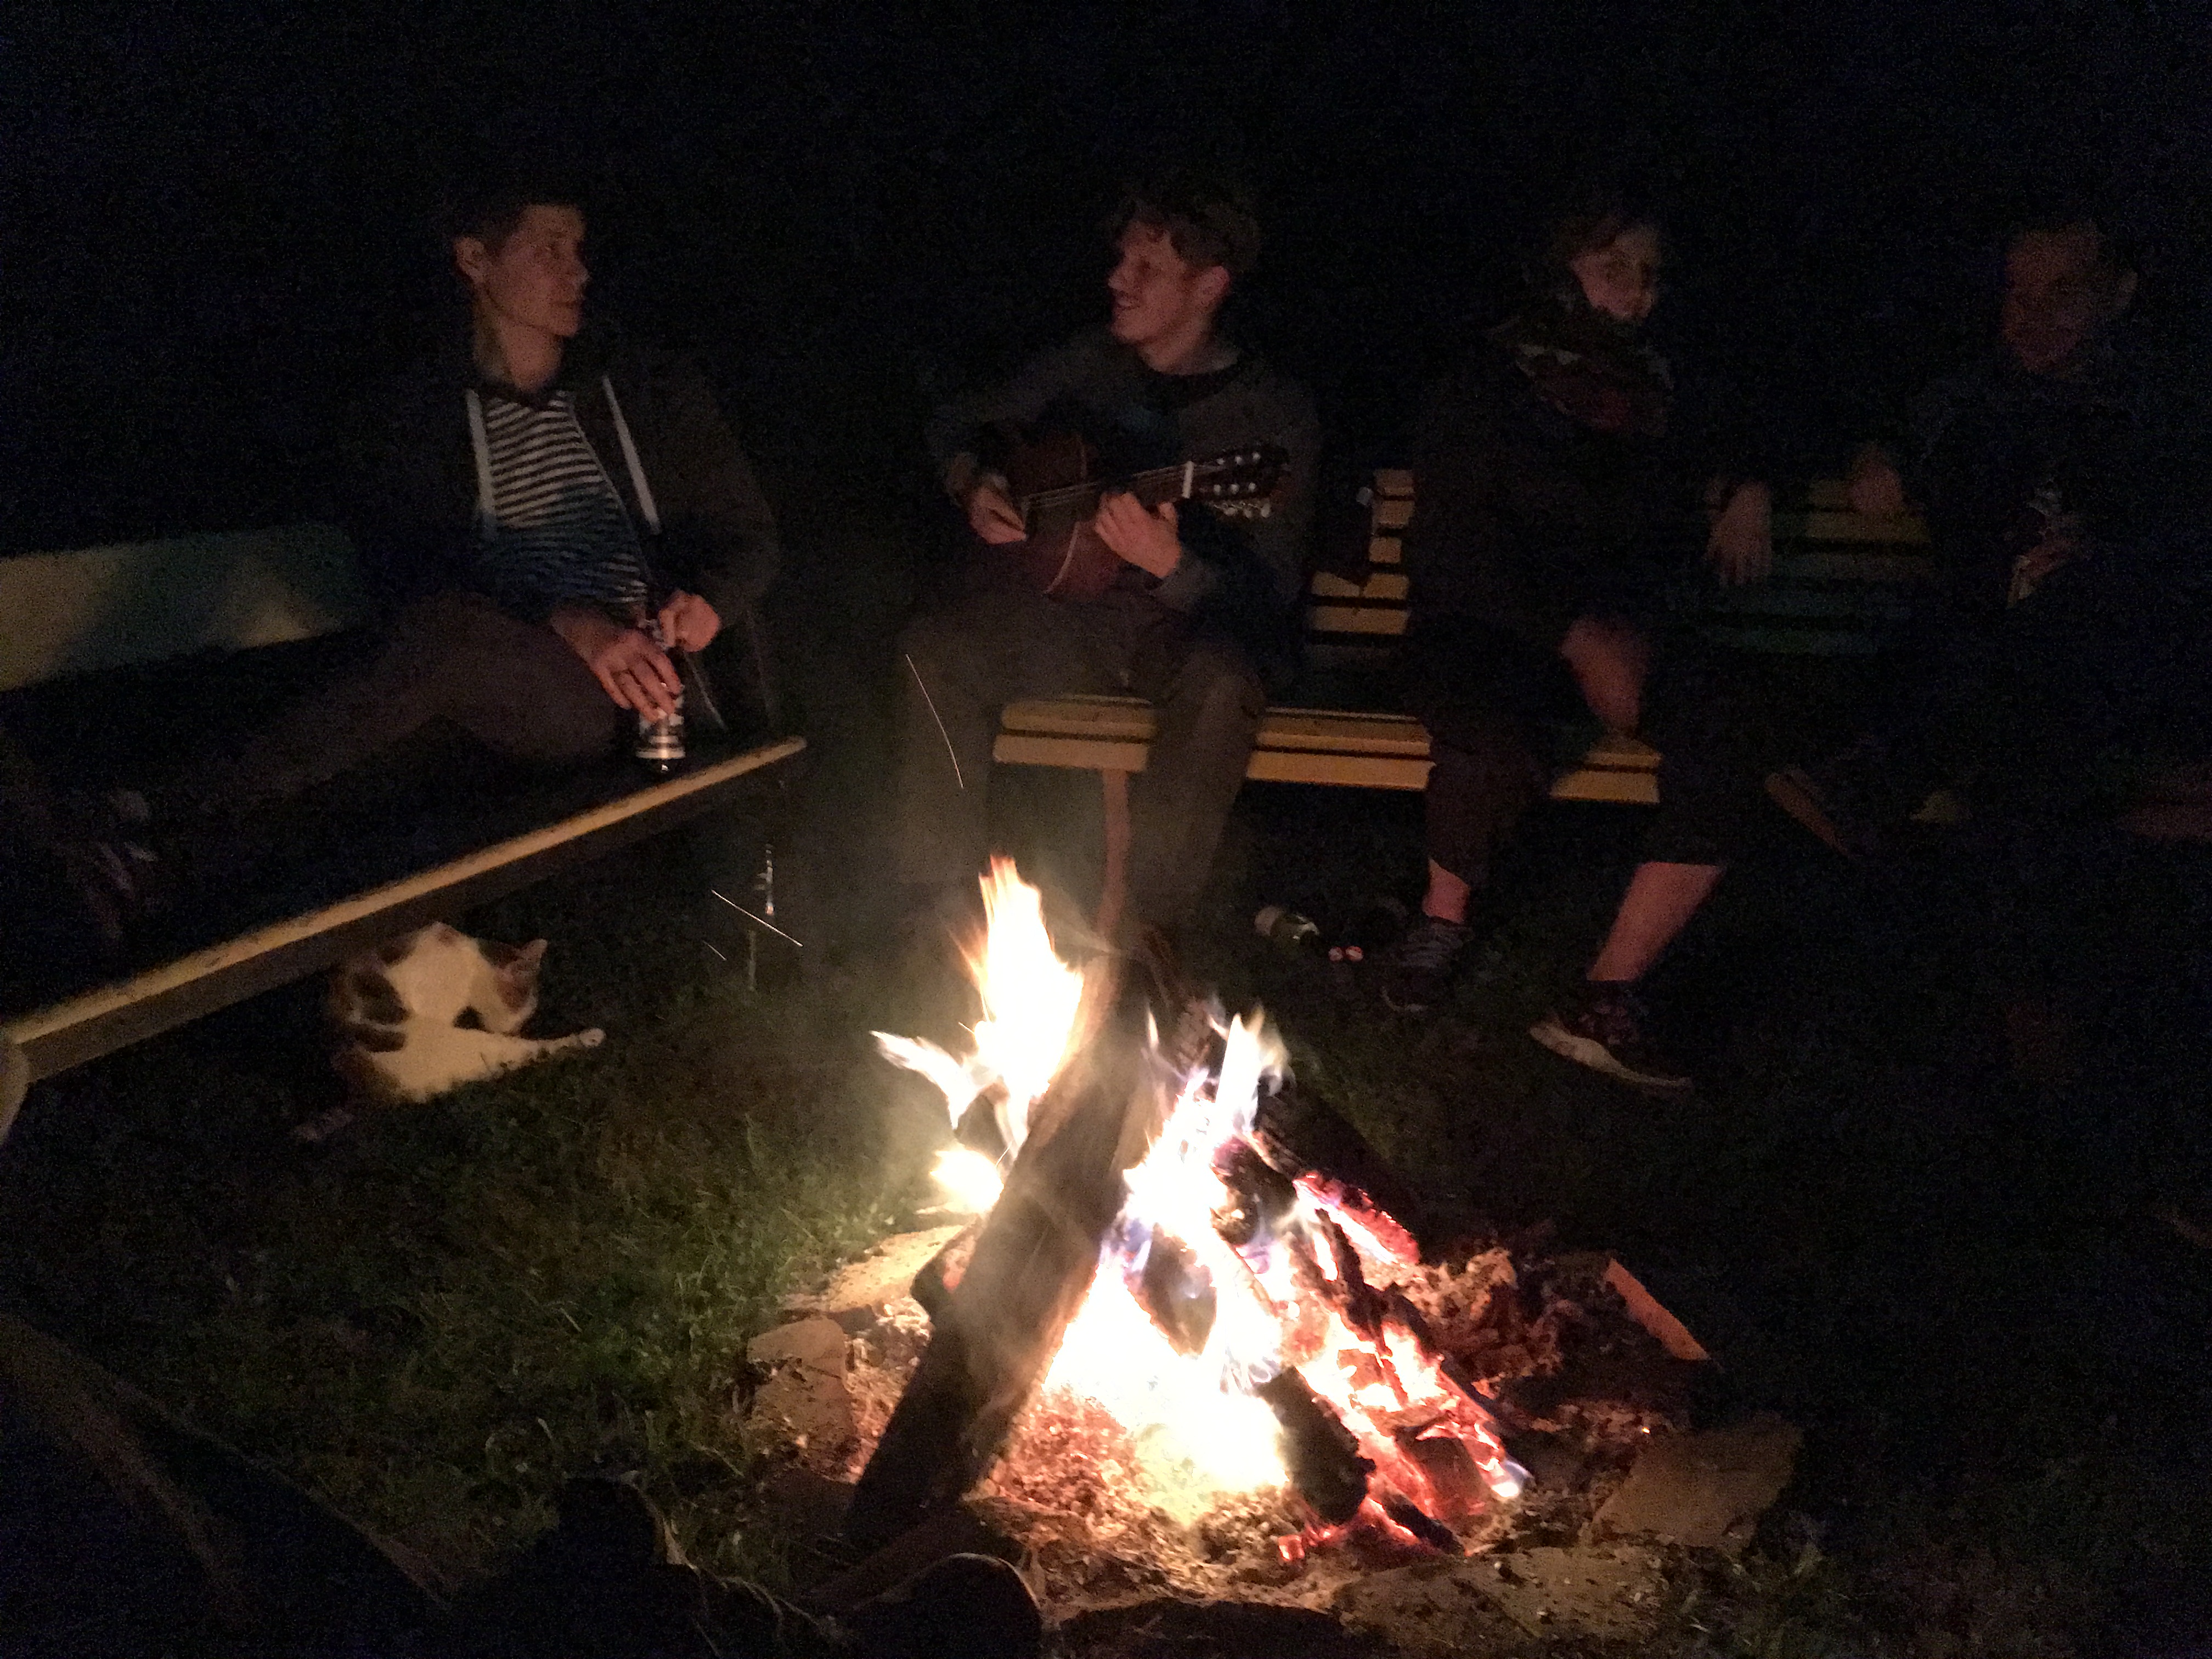 Buring fire and discussions